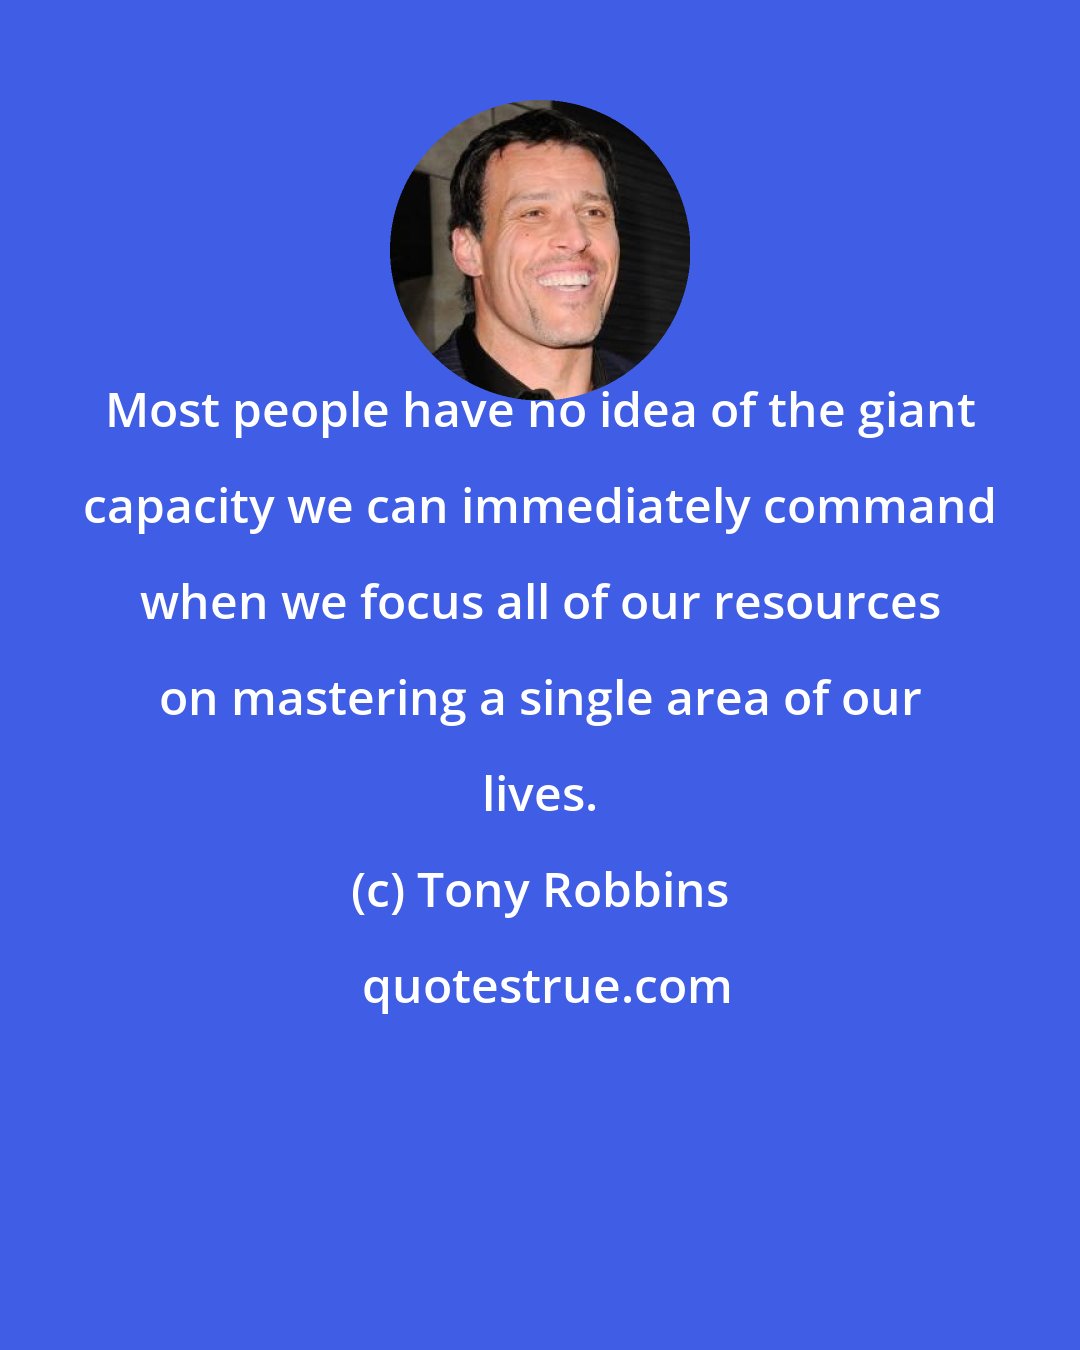 Tony Robbins: Most people have no idea of the giant capacity we can immediately command when we focus all of our resources on mastering a single area of our lives.